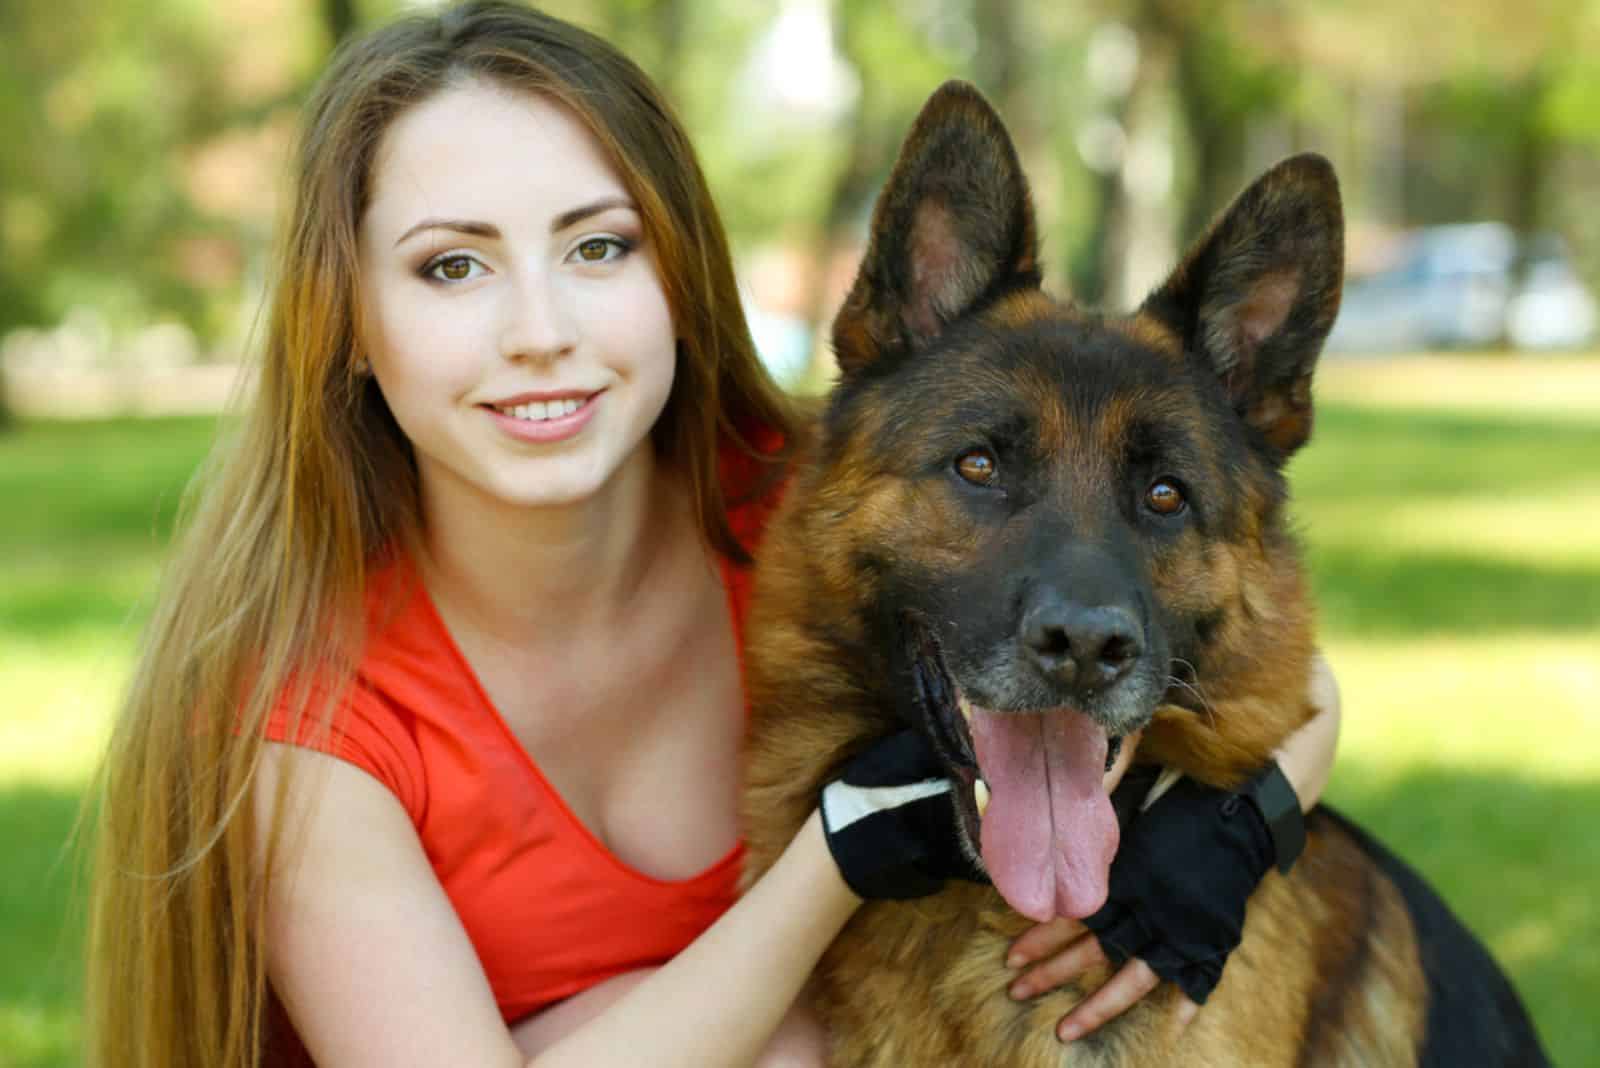 smiling woman embracing her dog in the park